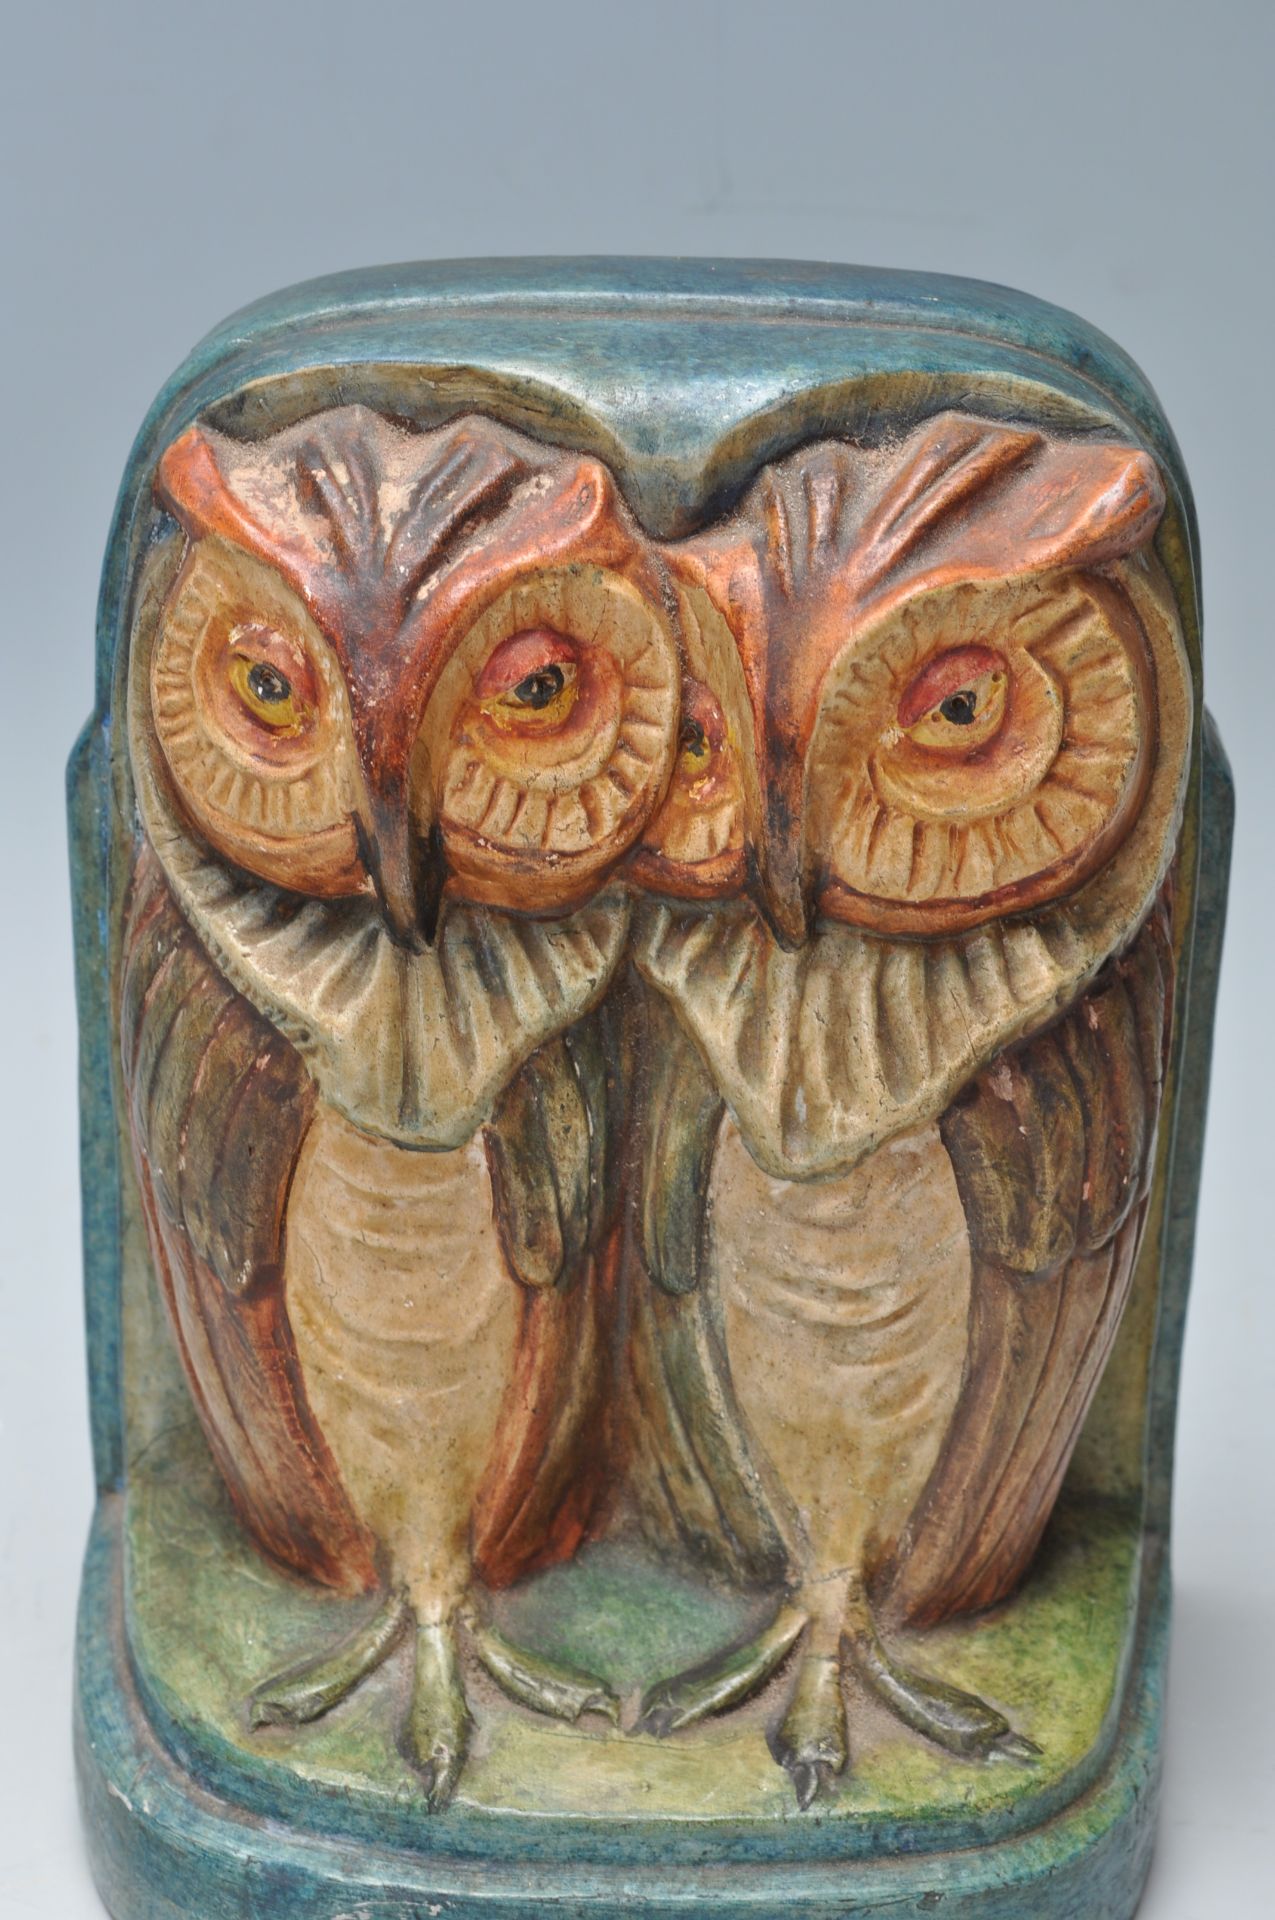 RARE EARLY 20TH CENTURY ARTS AND CRAFTS COMPTON POTTERY OWL BOOKEND - Image 5 of 7